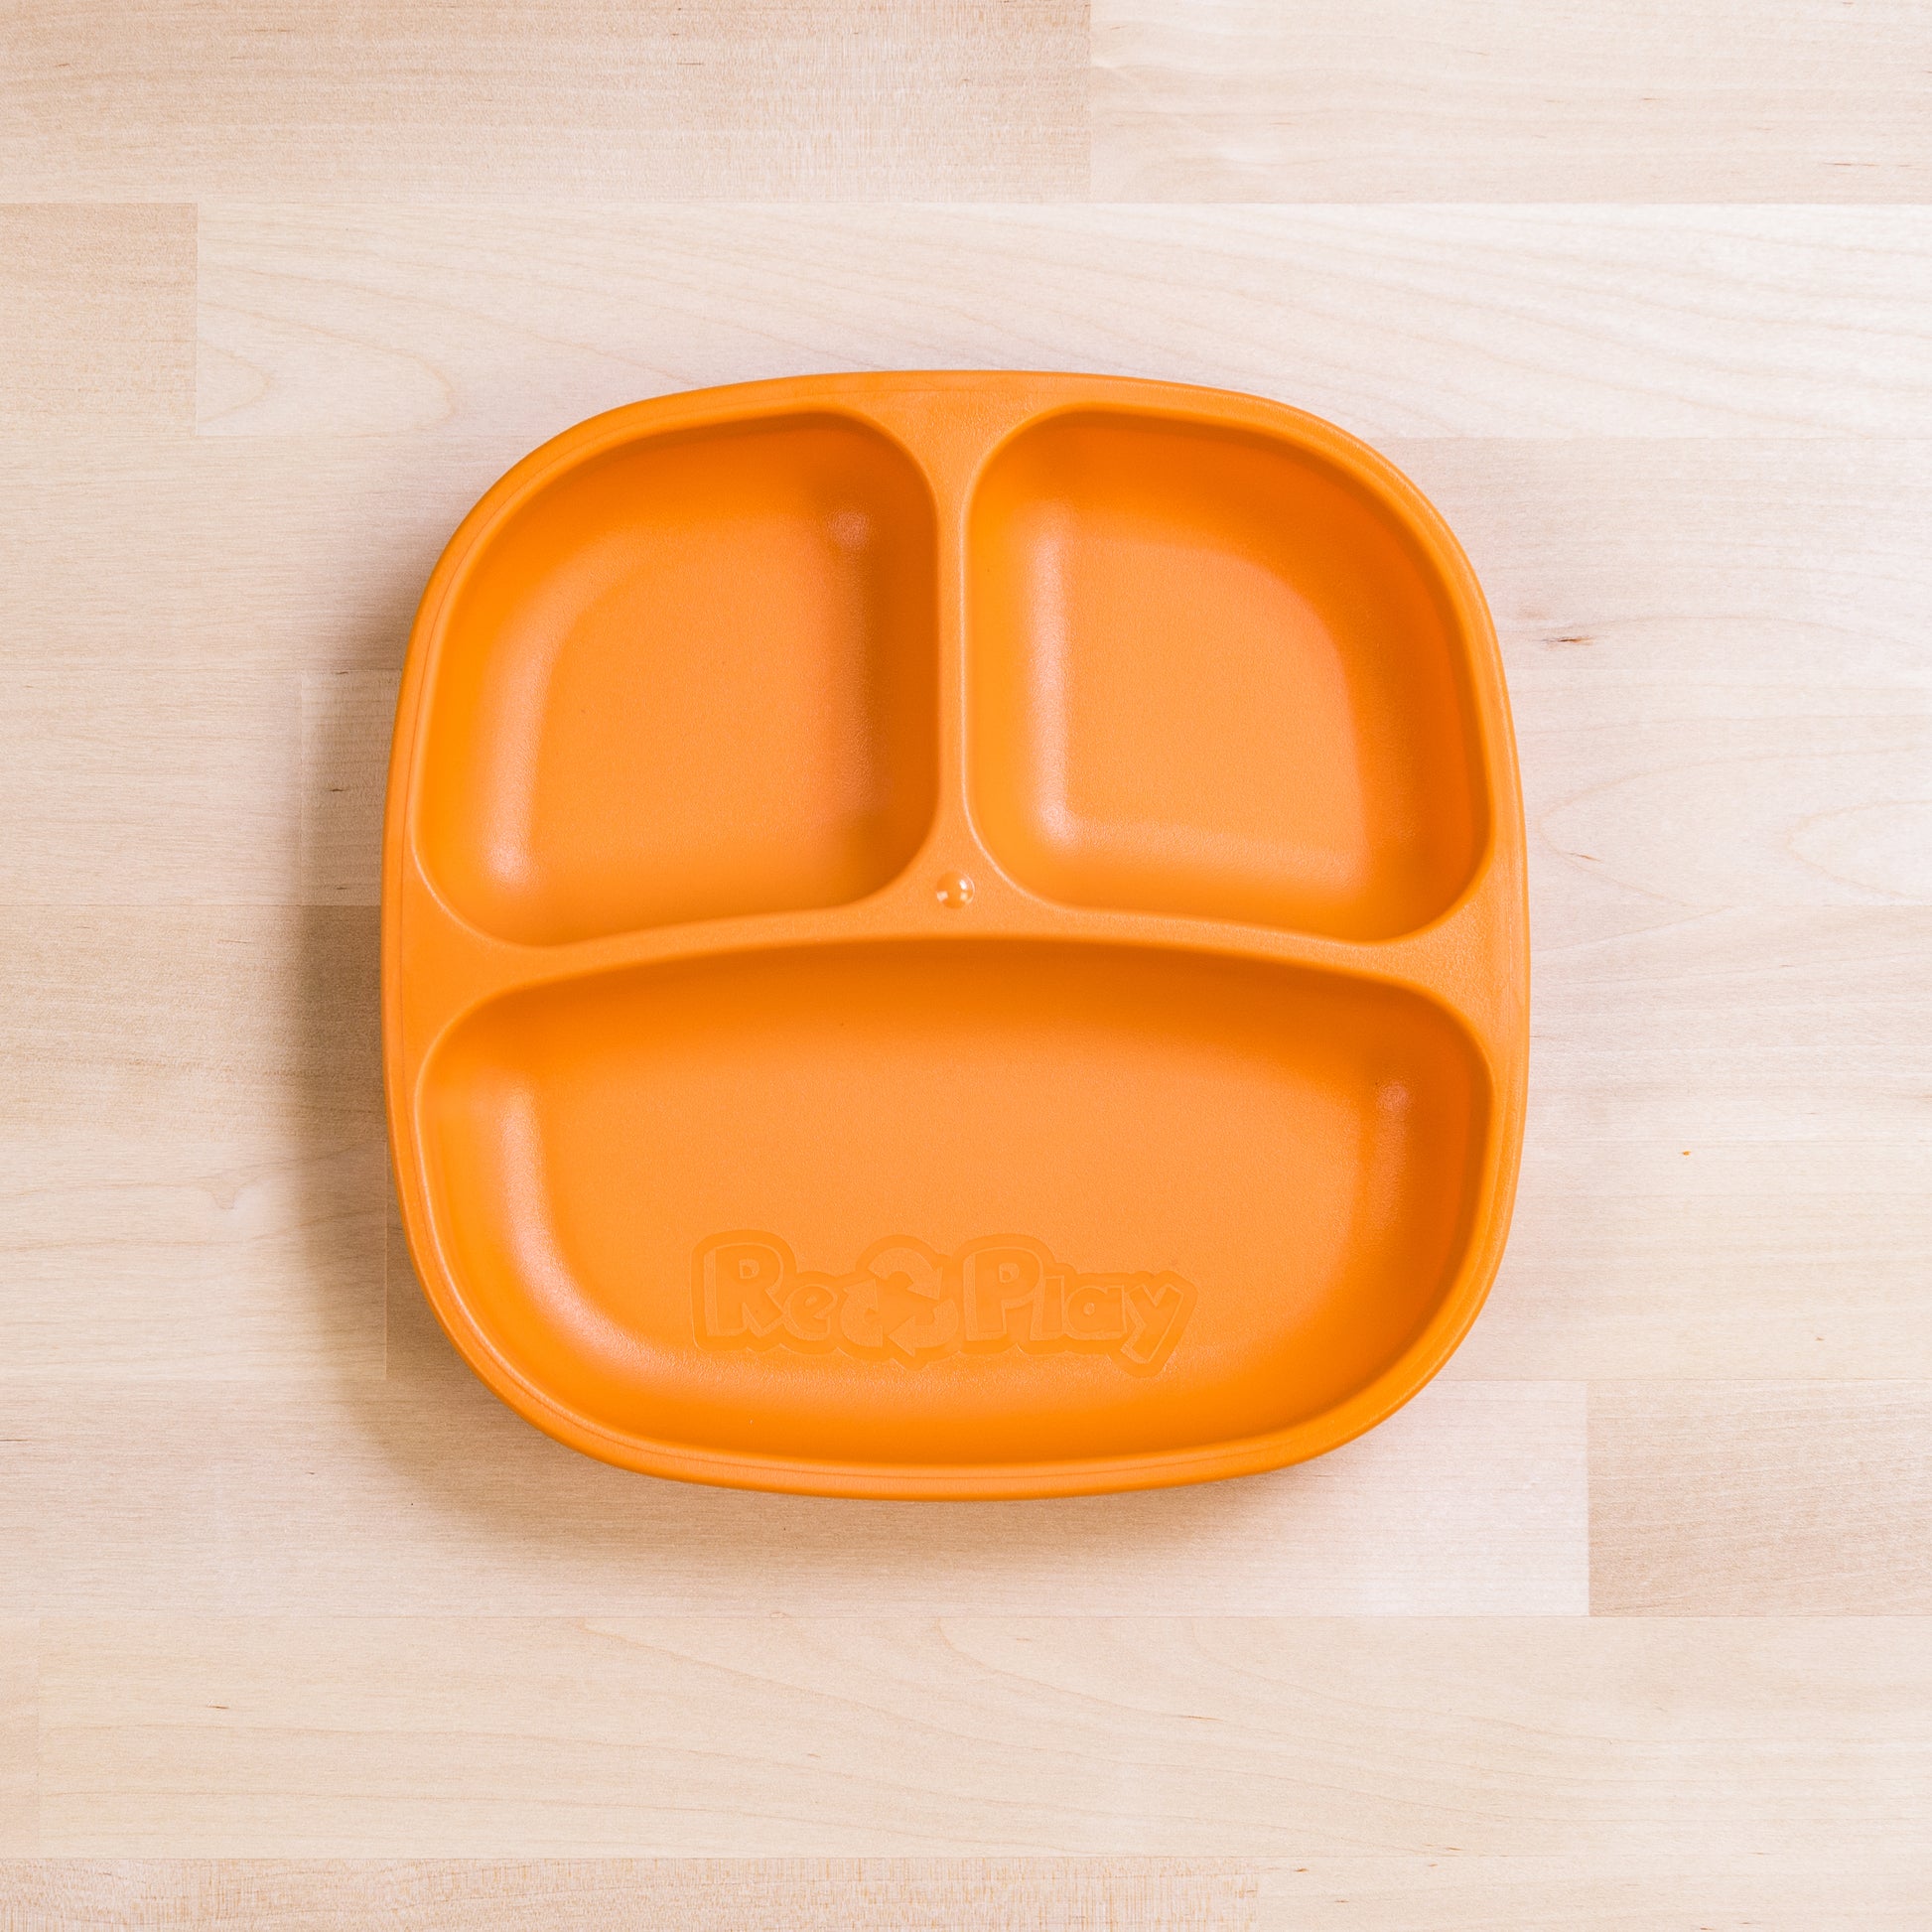 Re-Play Divided Plate 7" plate in Orange from Bear & Moo